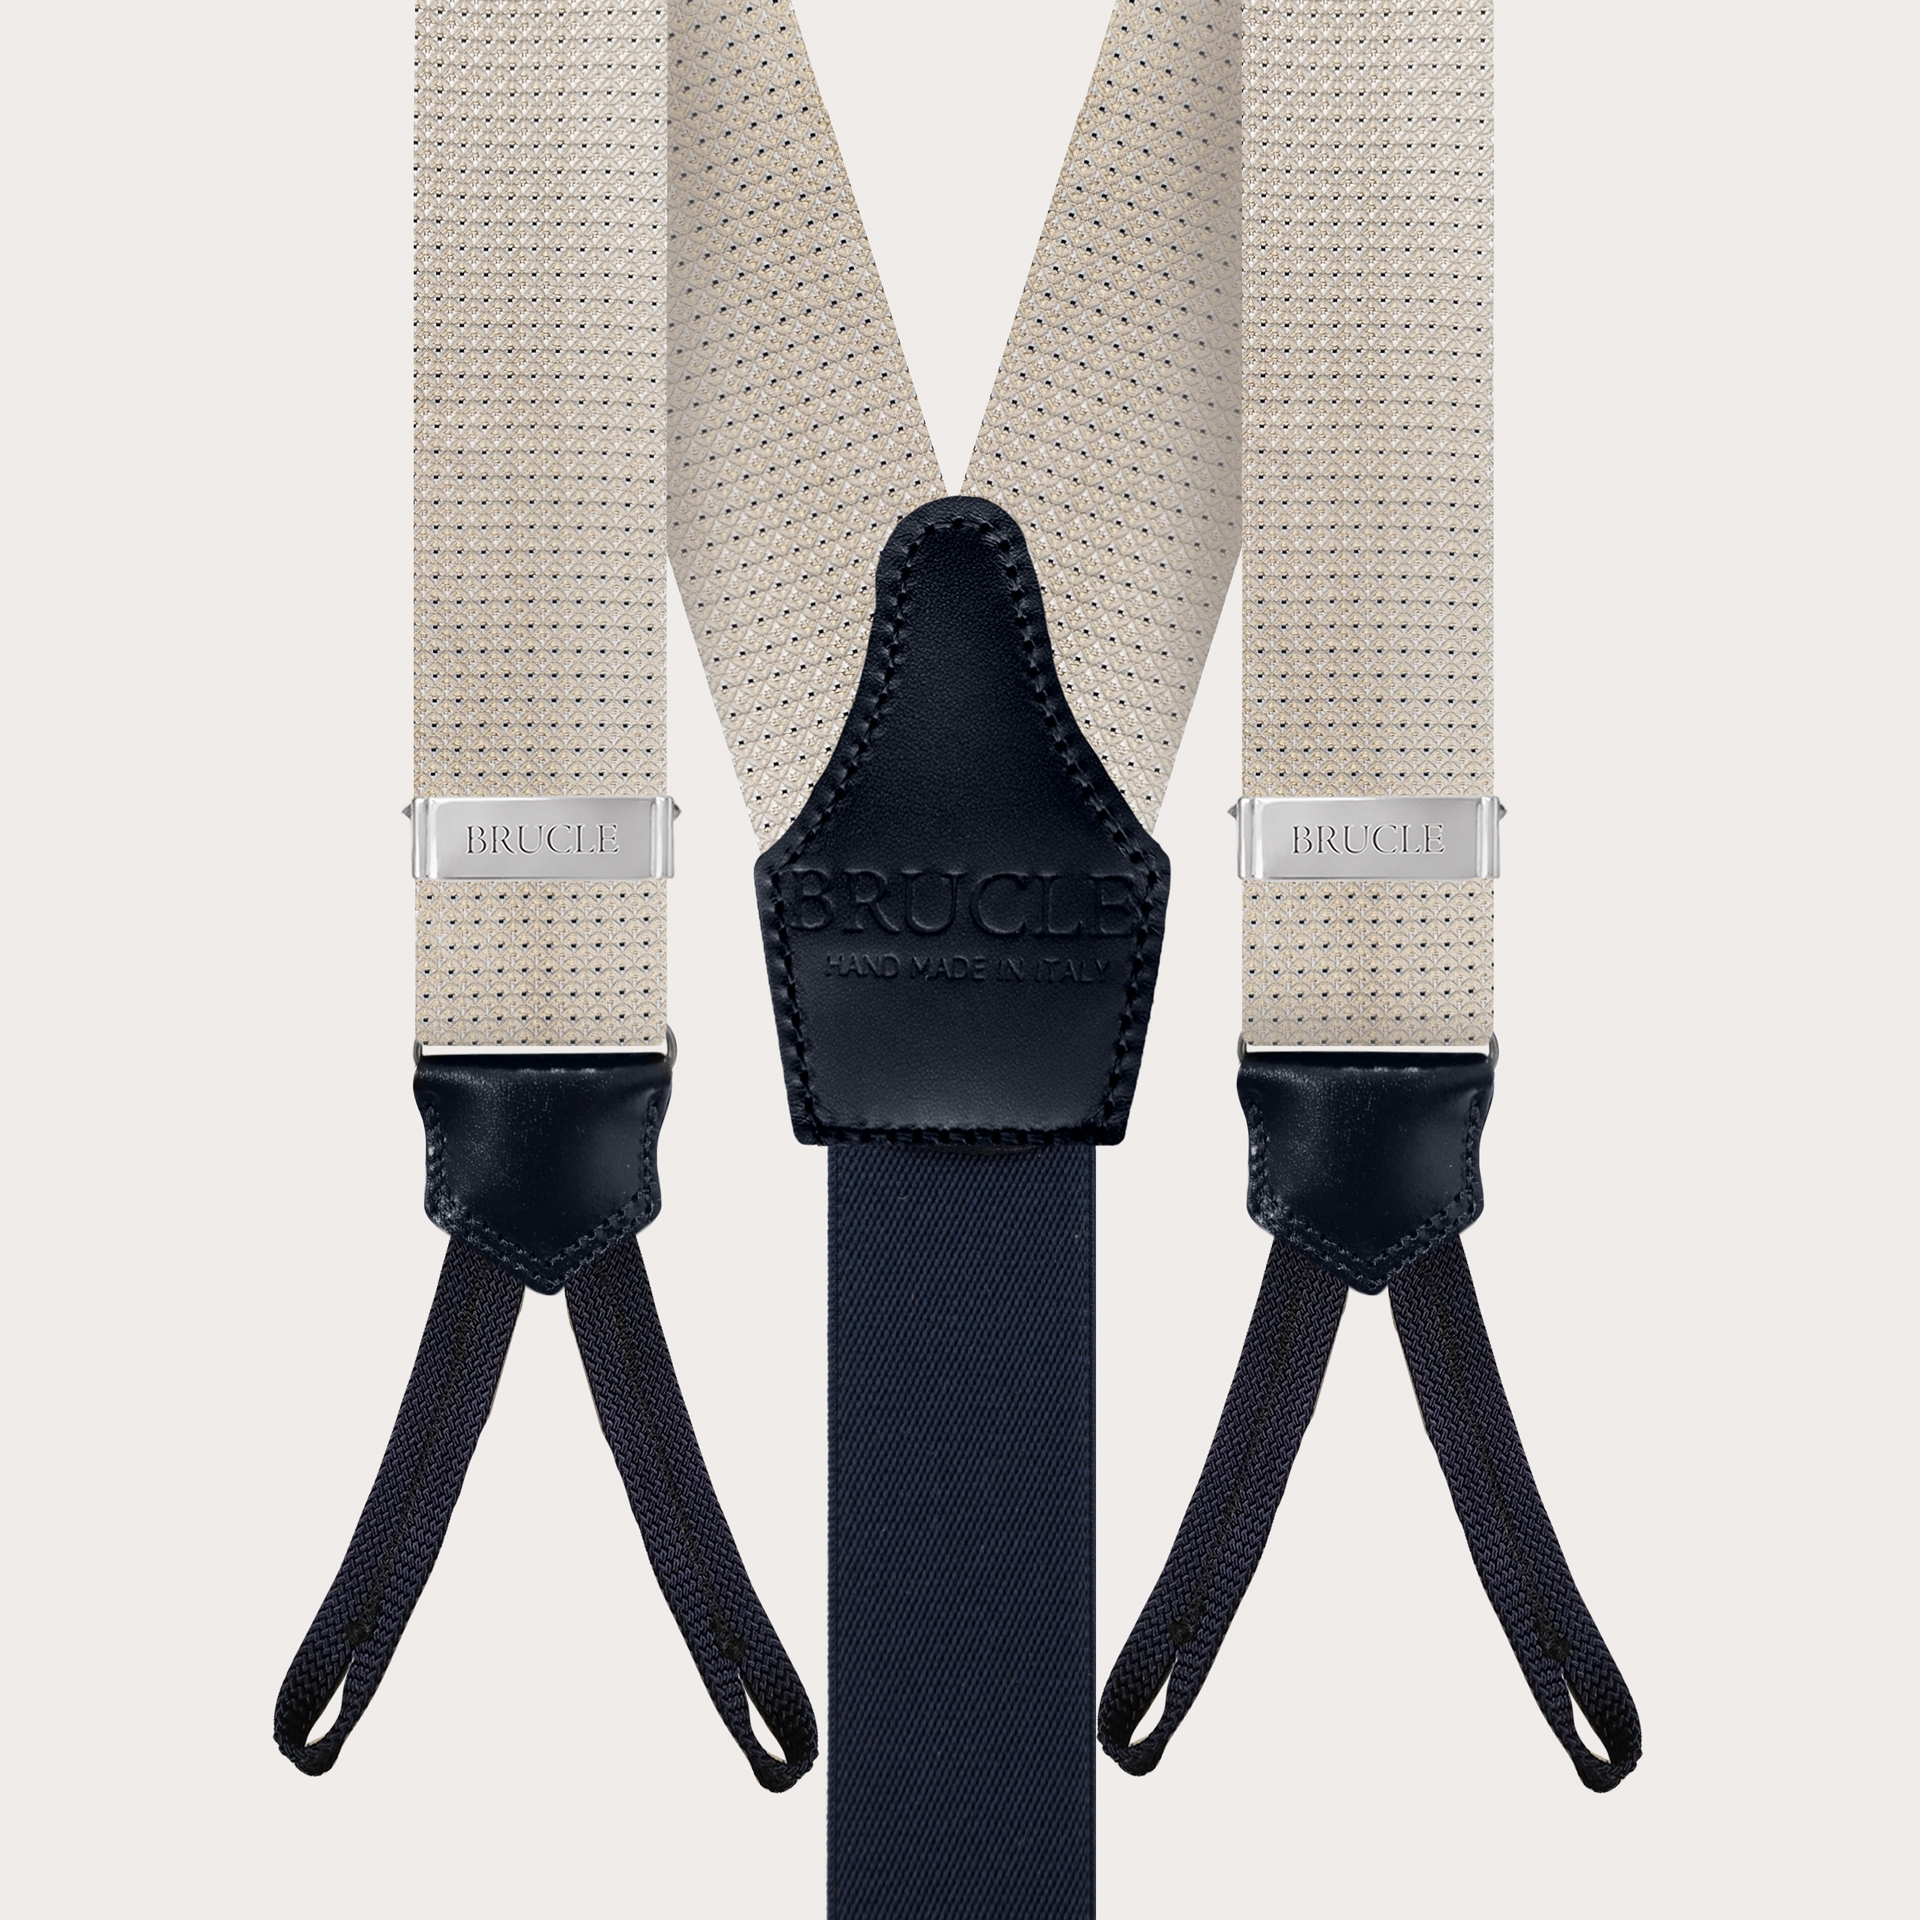 BRUCLE Men's suspenders in silk with buttonholes, ivory with blue micro-pattern